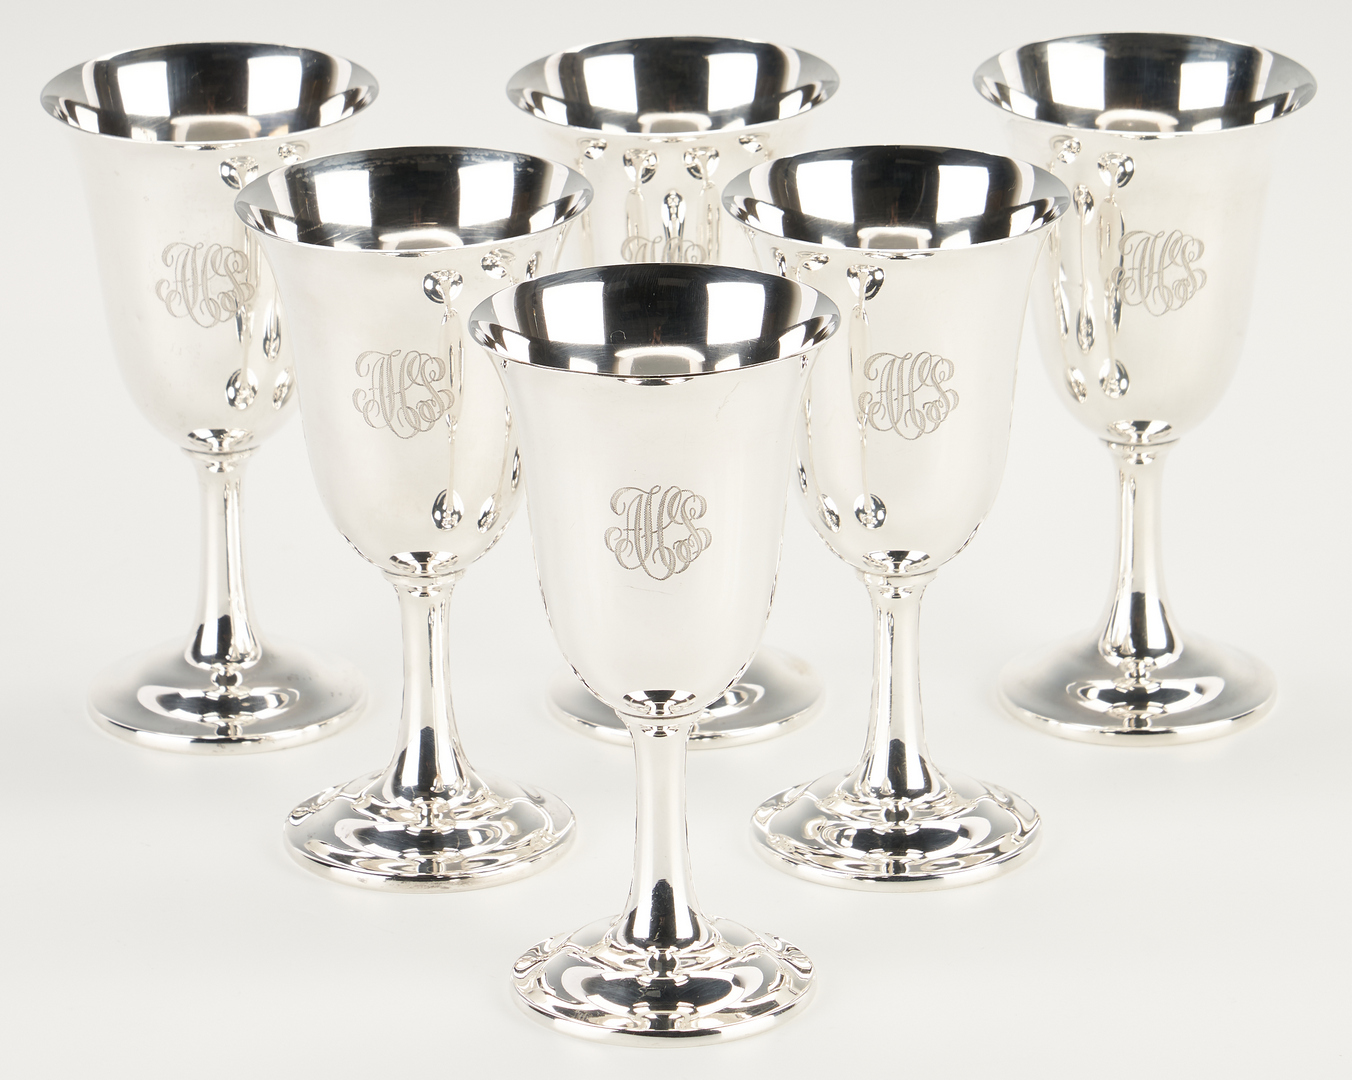 Lot 515: Eight (8) Sterling Silver Items, incl. Wallace Goblets